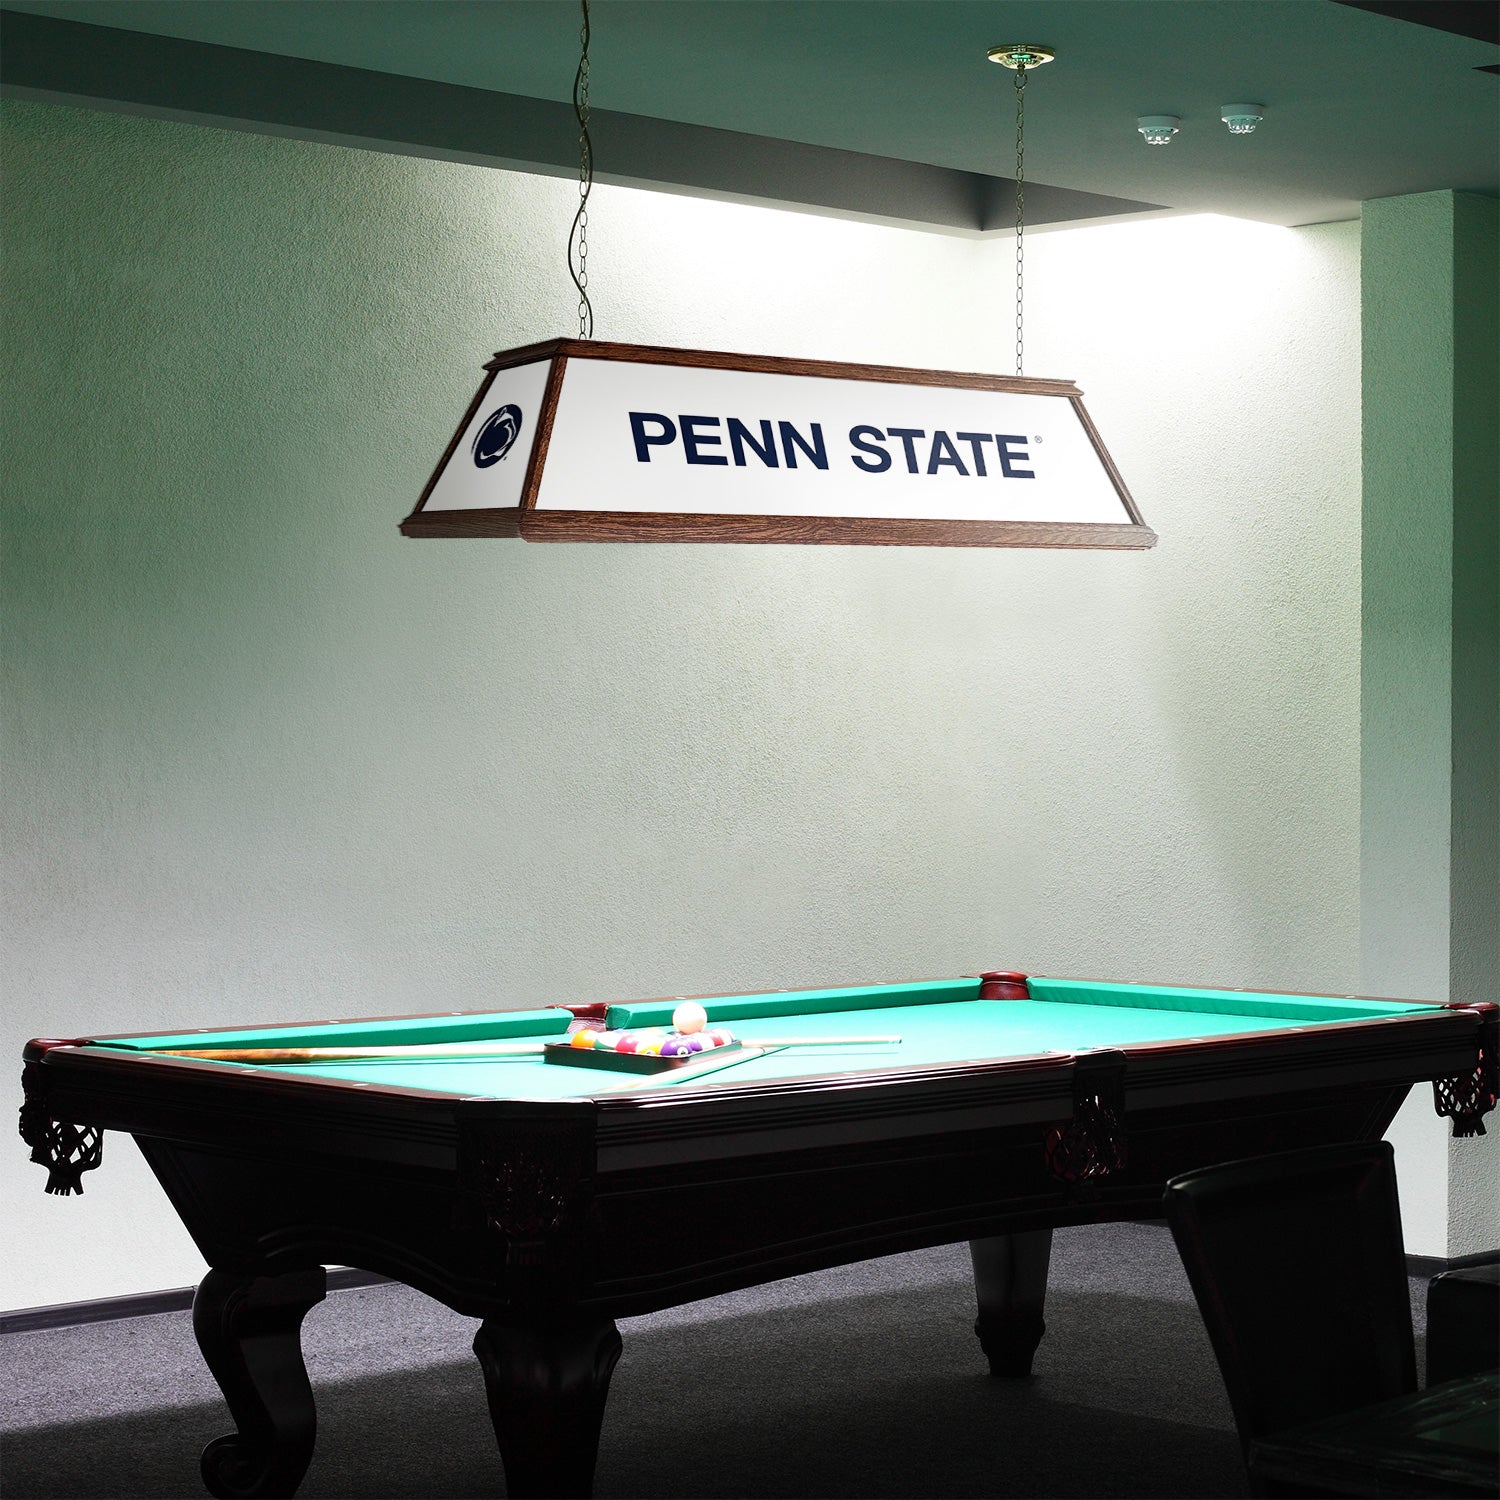 Penn State Nittany Lions Premium Pool Table Light Room View